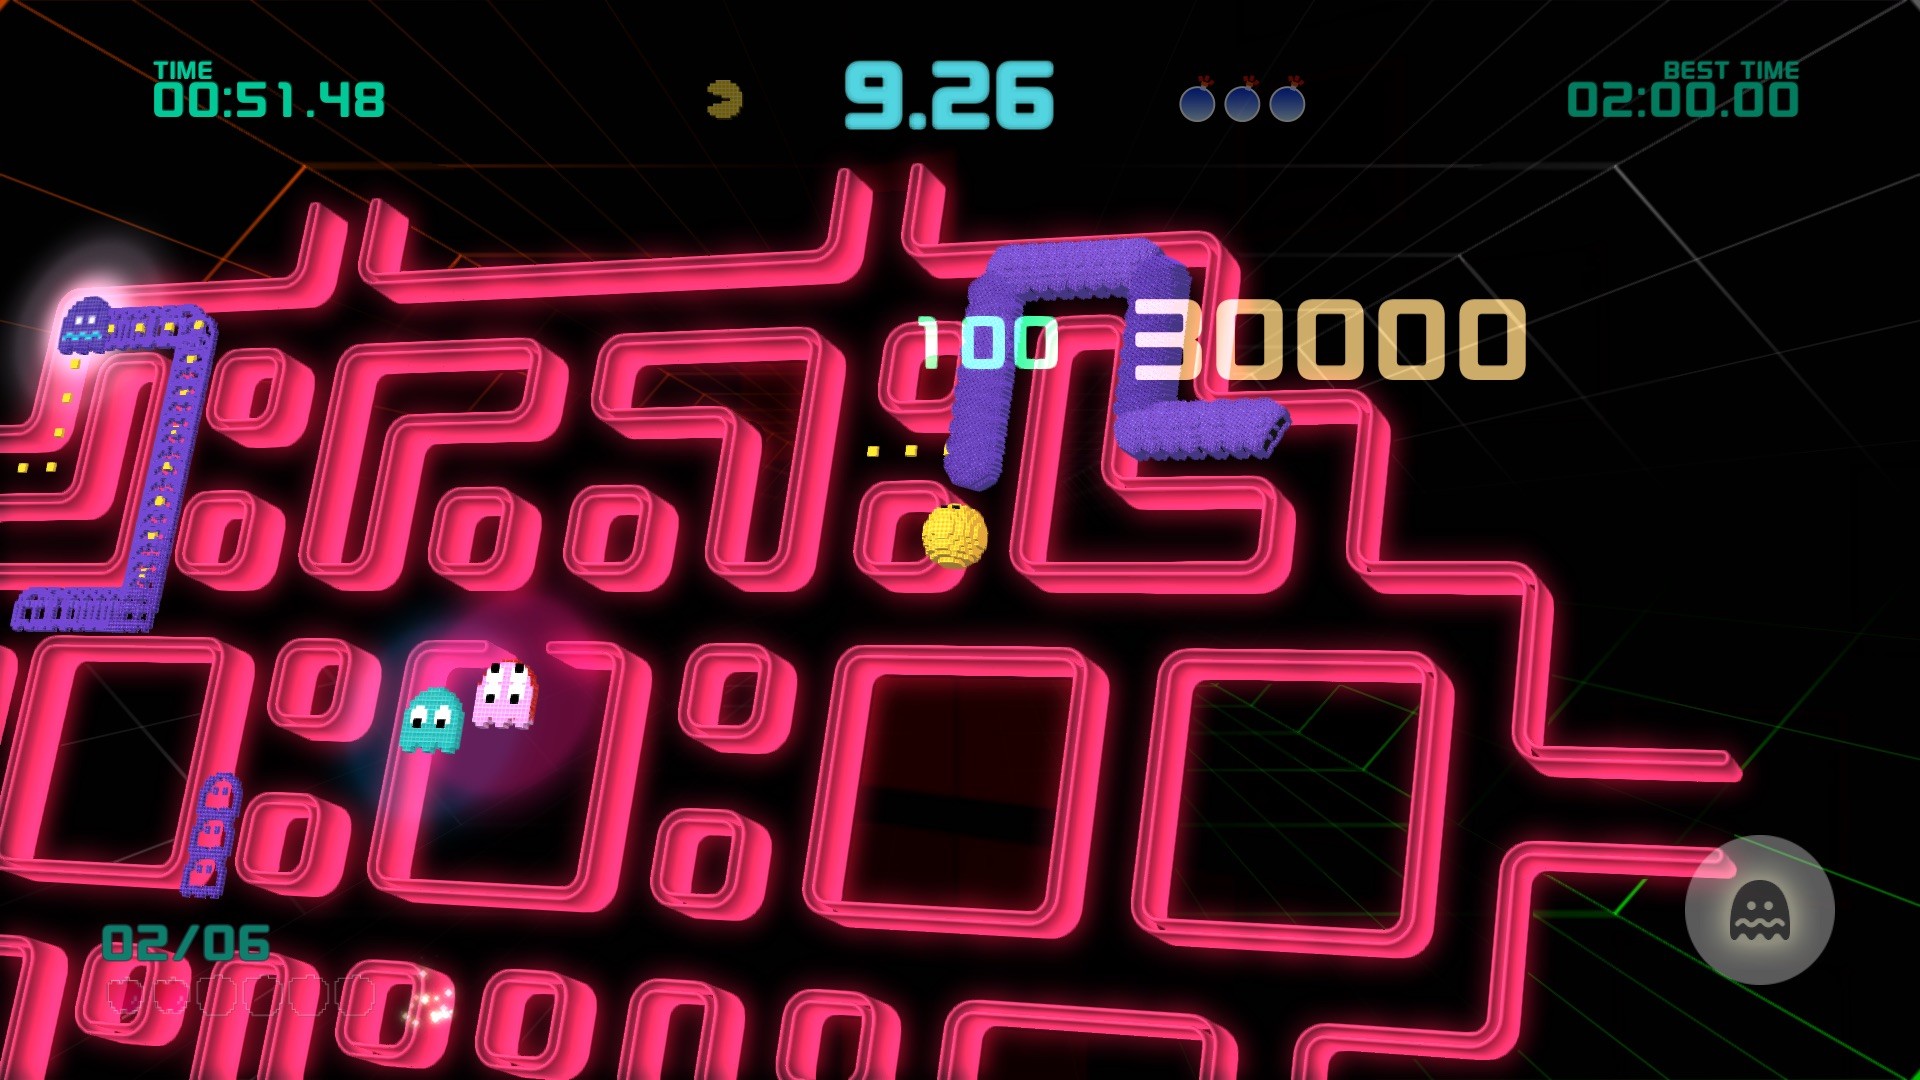 1920x1080 In certain games modes, things can get absolutely frantic as you reach the  pinnacle of your score run, knowing that just a few extra seconds could  make all ...